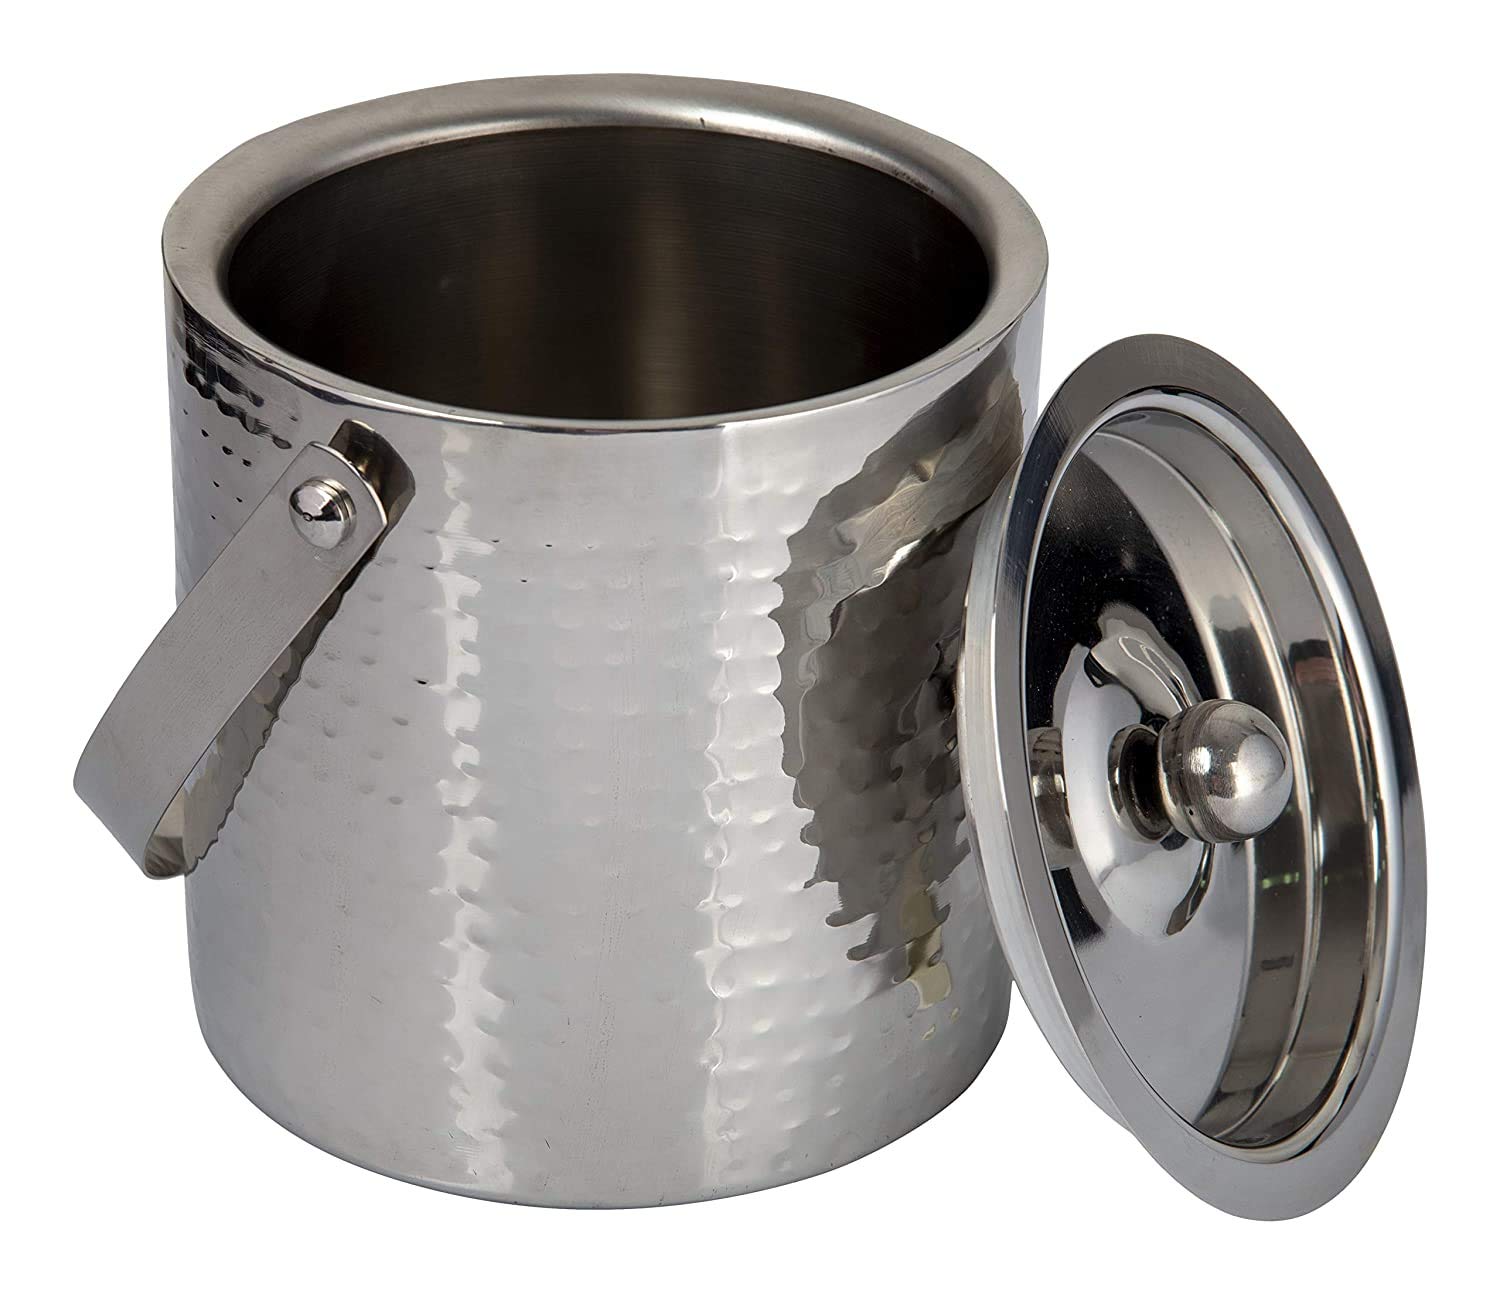 Stainless Steel Ice Bucket and Tongs - Hammered Finish - Abrazo